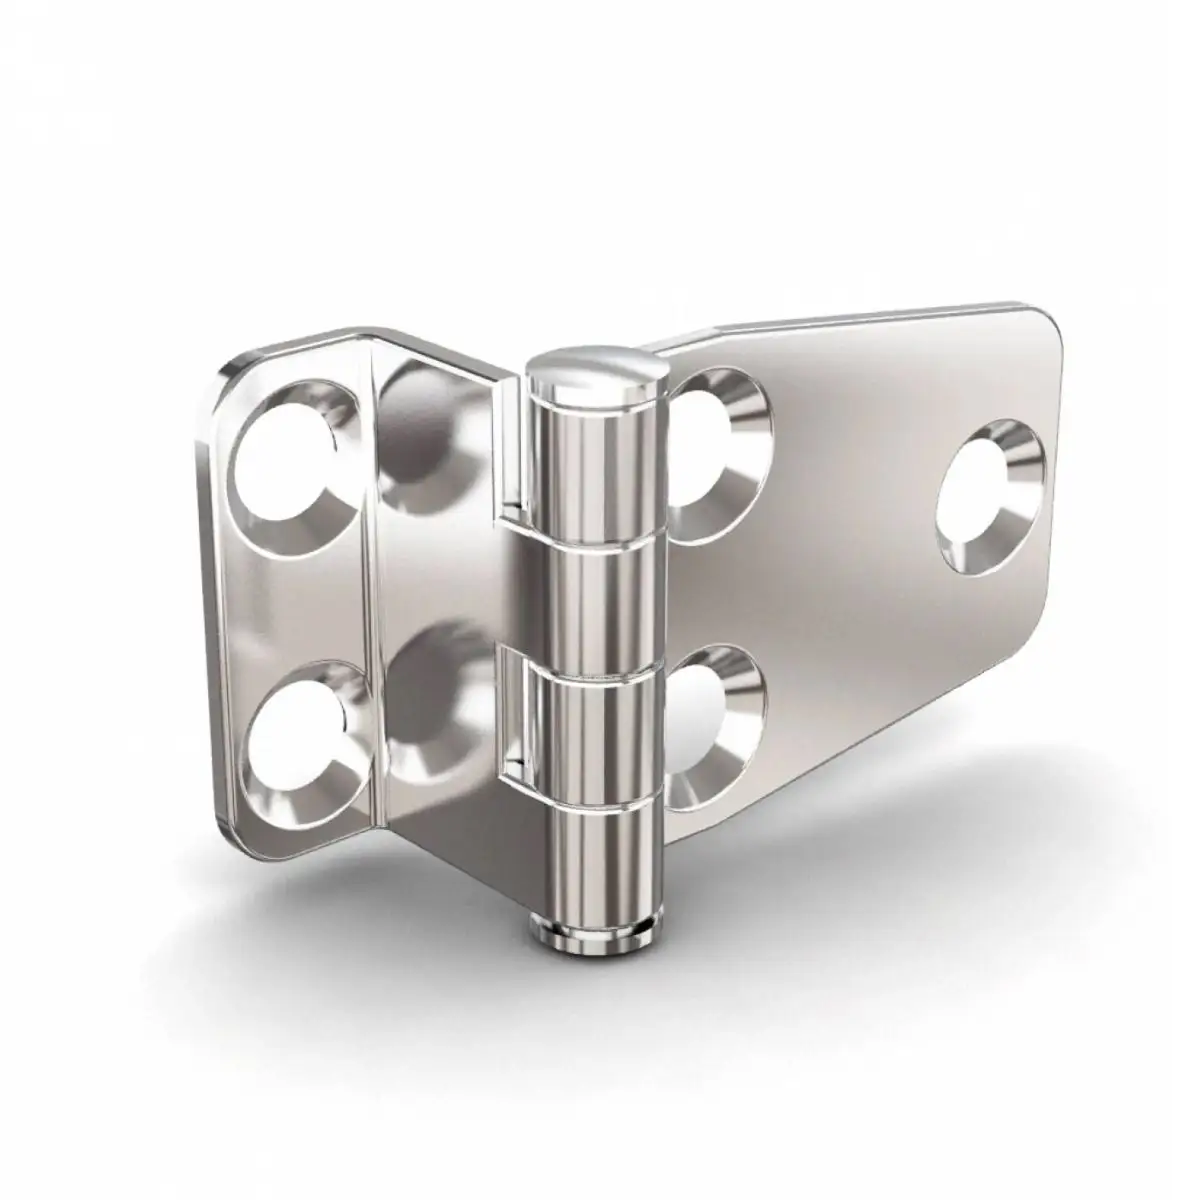 Stainless steel stamping  folding  bent hinges  fixed buffer hinges  household bimini fitting marine hardware fittings